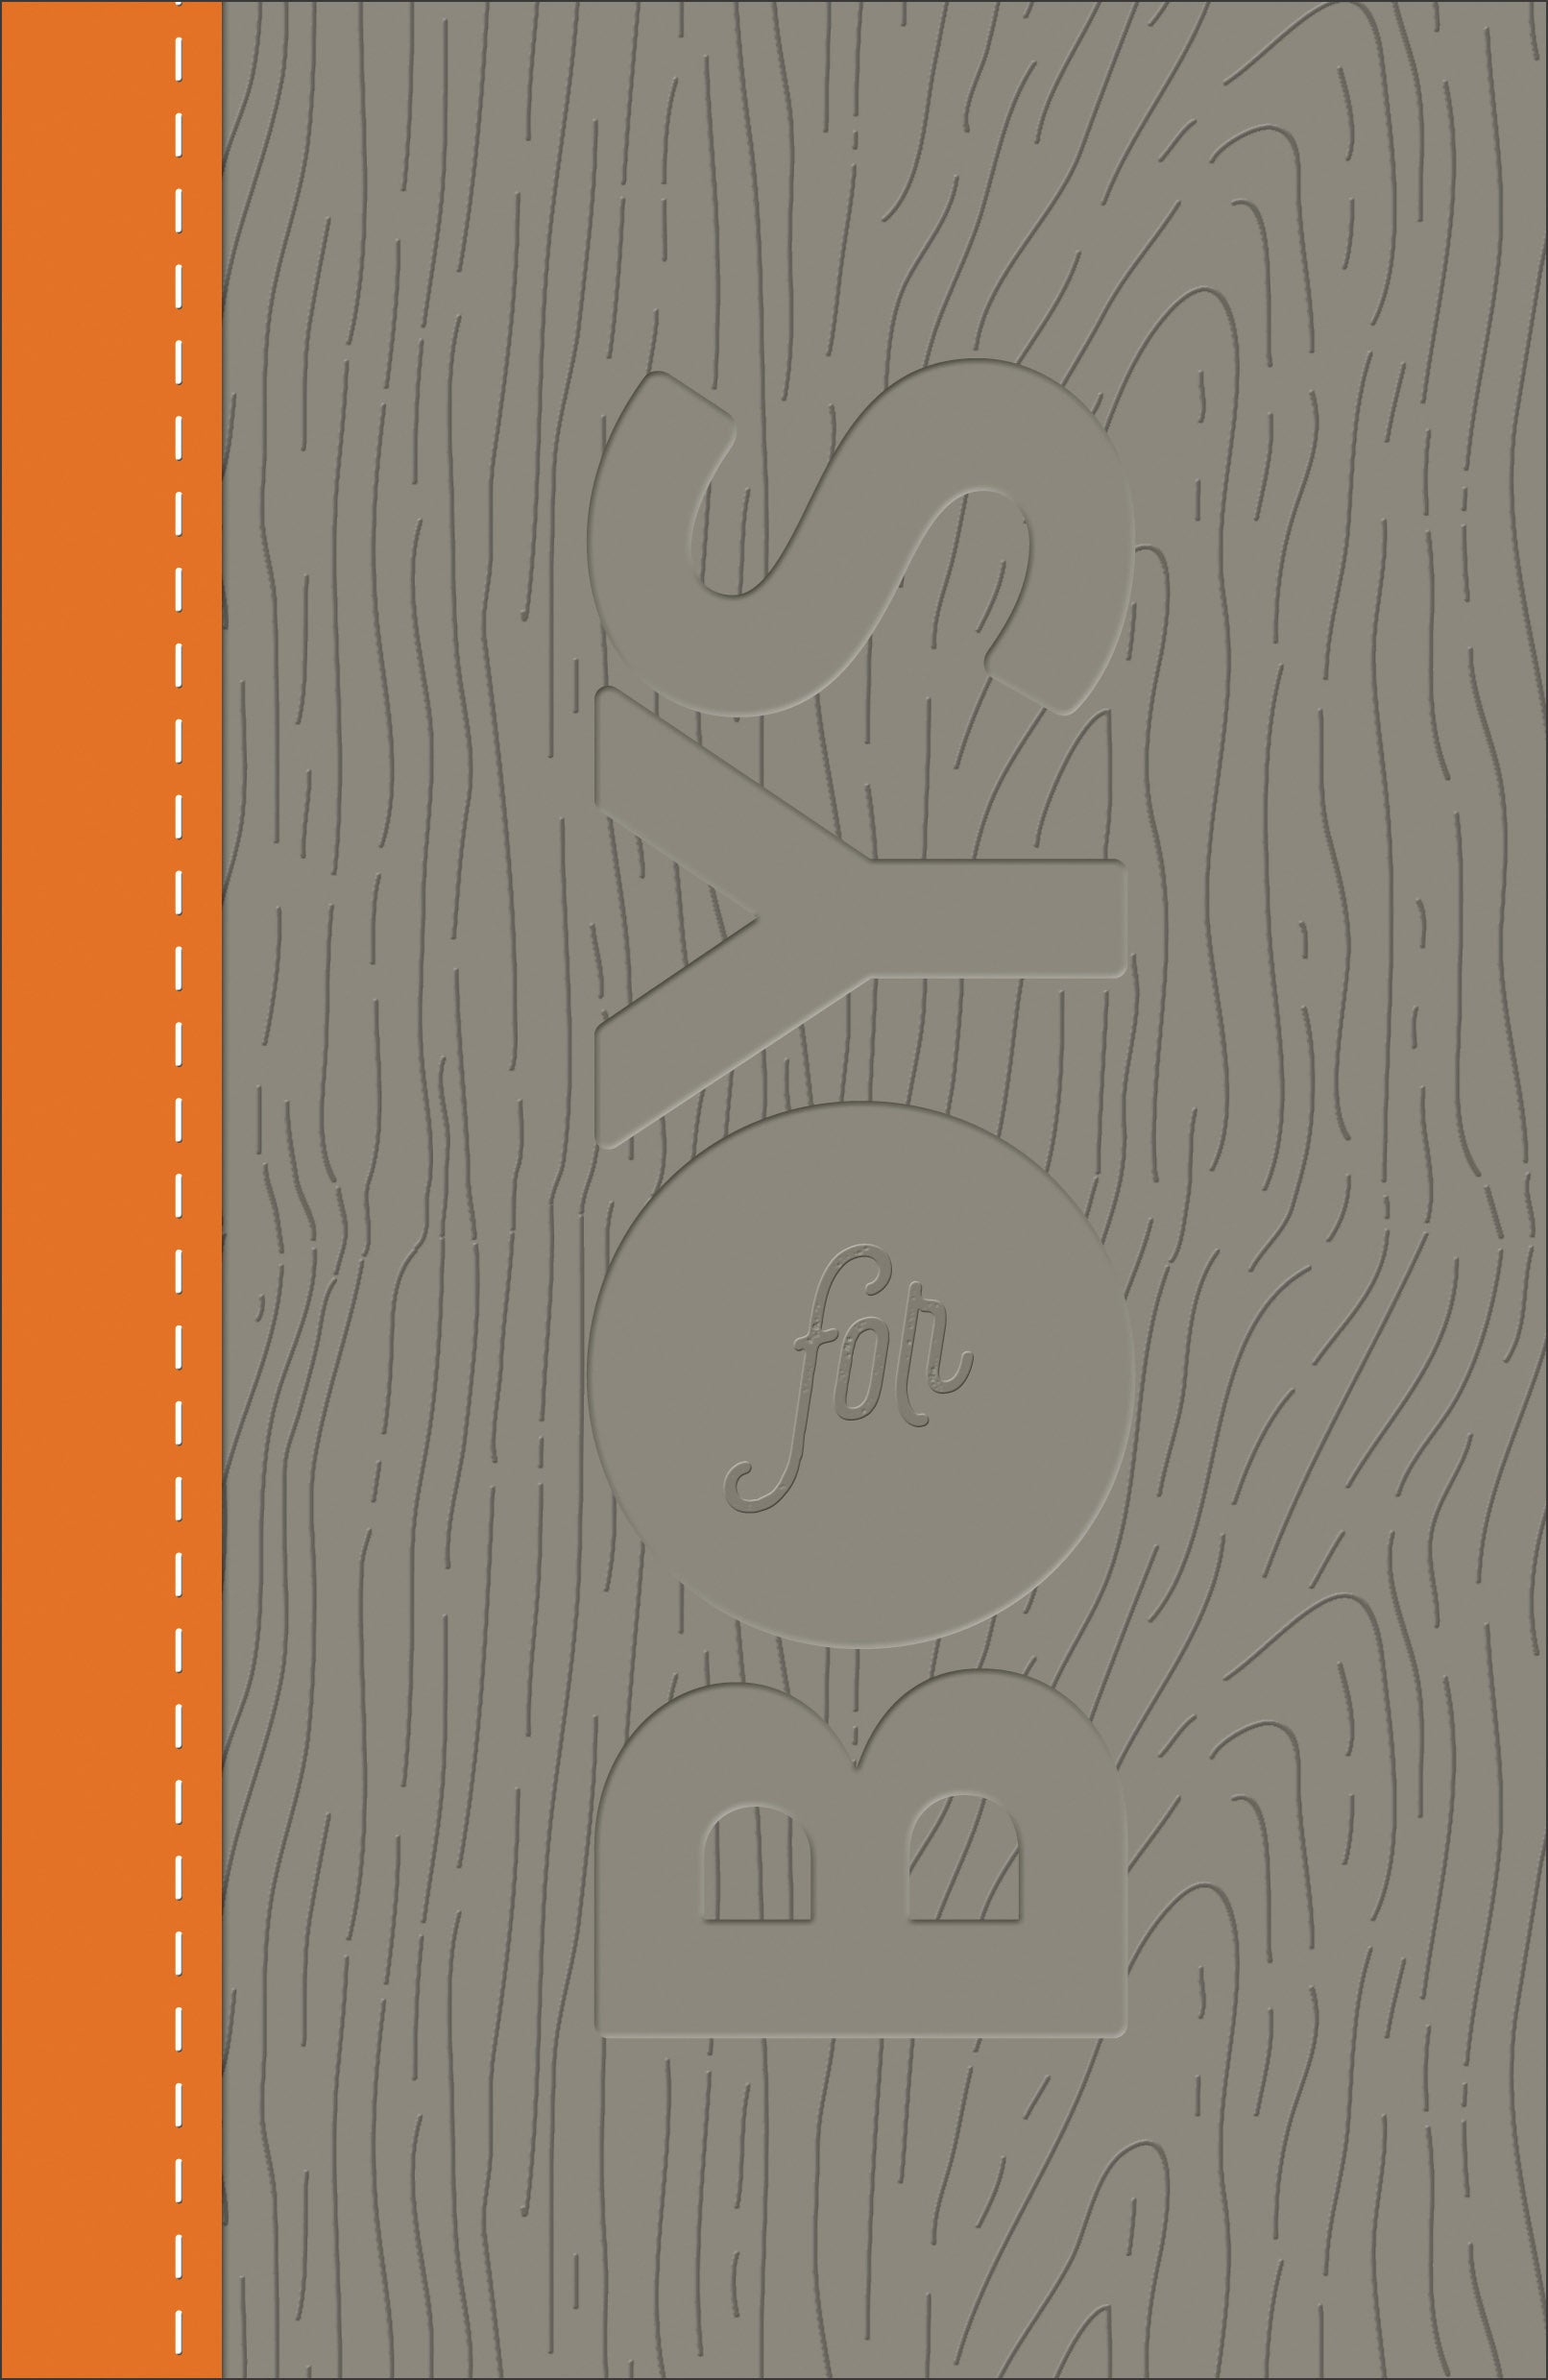 Image of CSB Study Bible For Boys Charcoal/Orange, Wood Design other